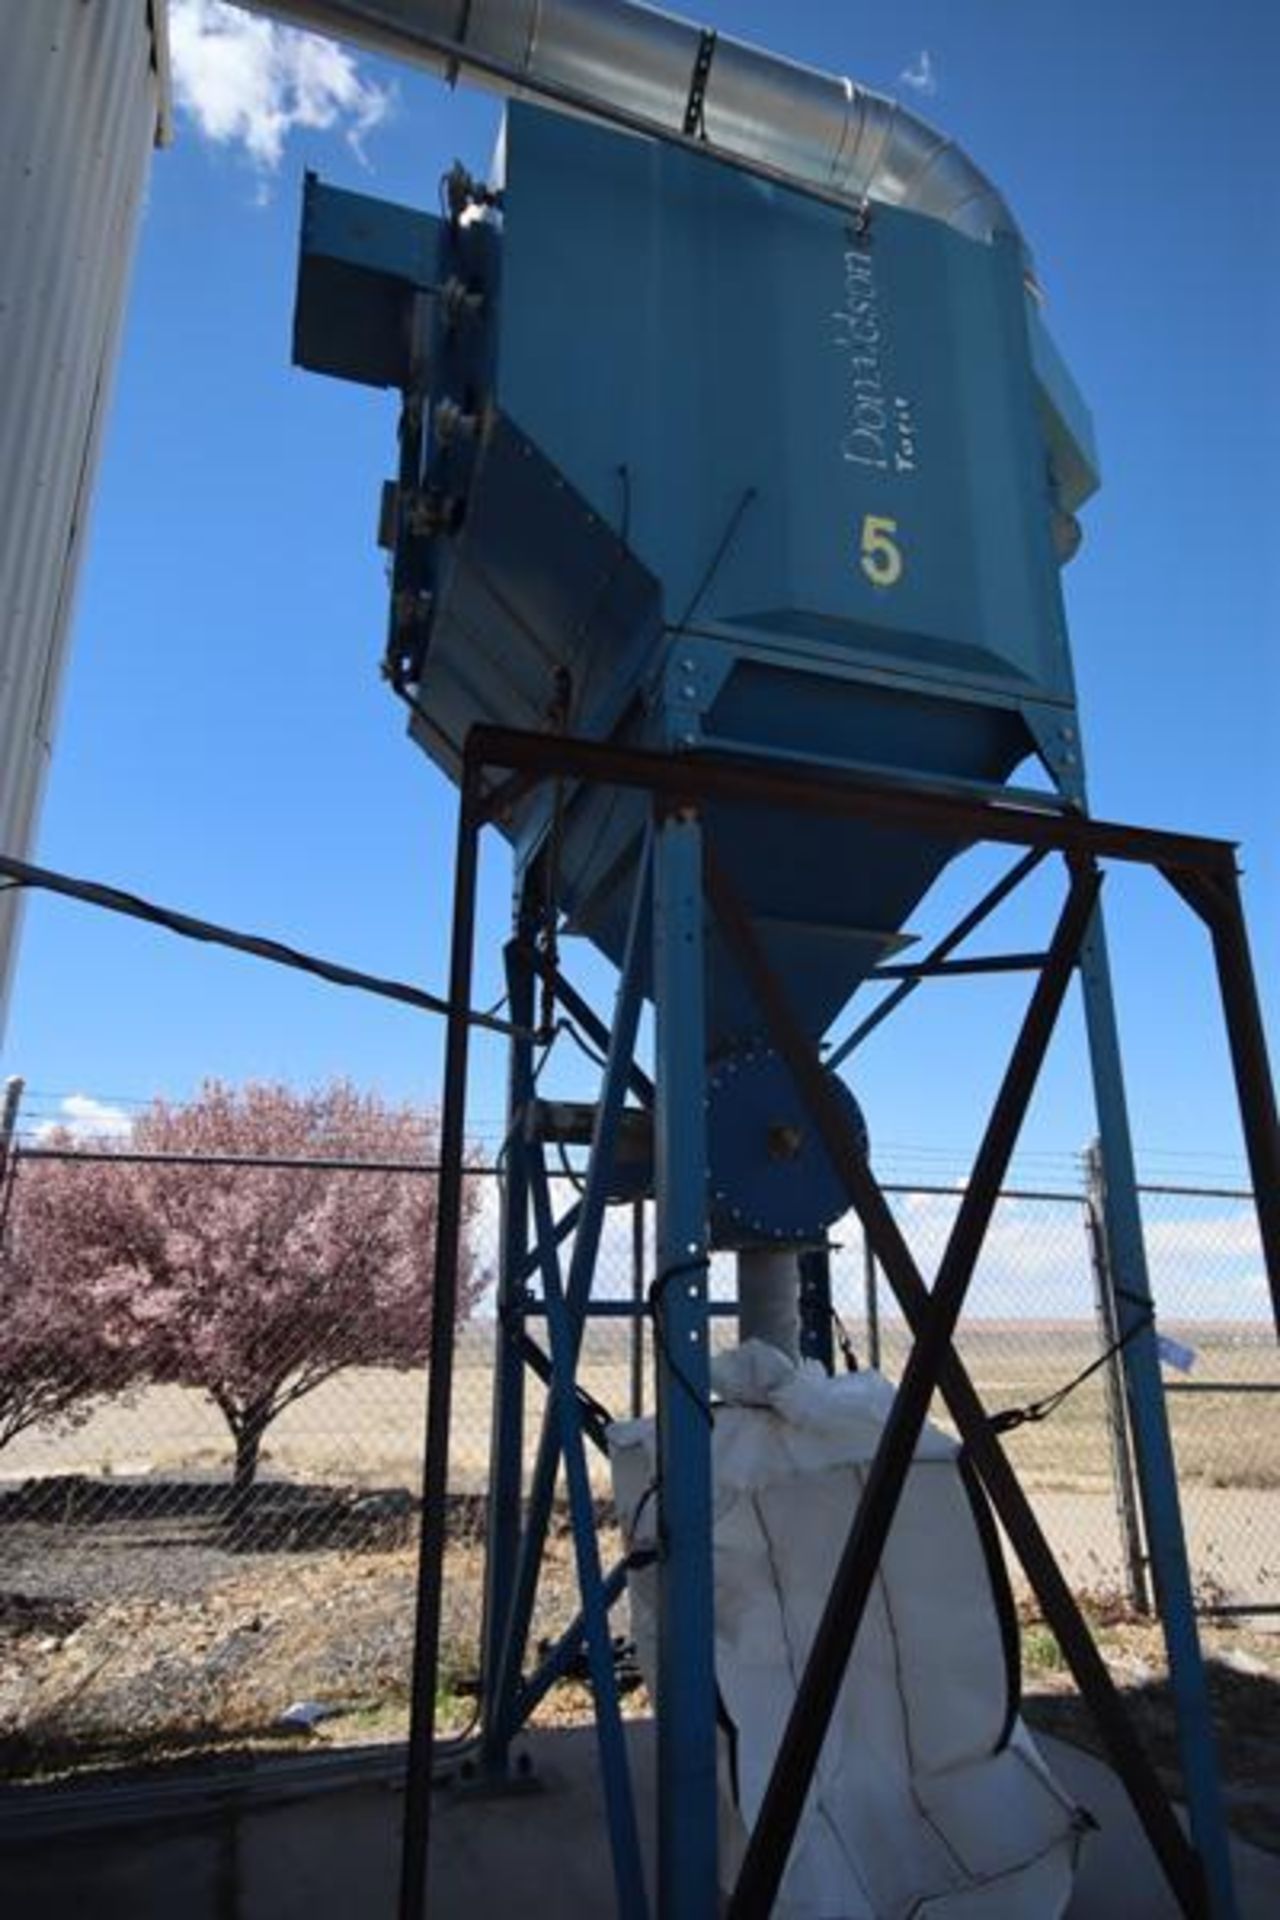 Donaldson Torit Dust Collector #5, 12 Cartridge - Image 3 of 3